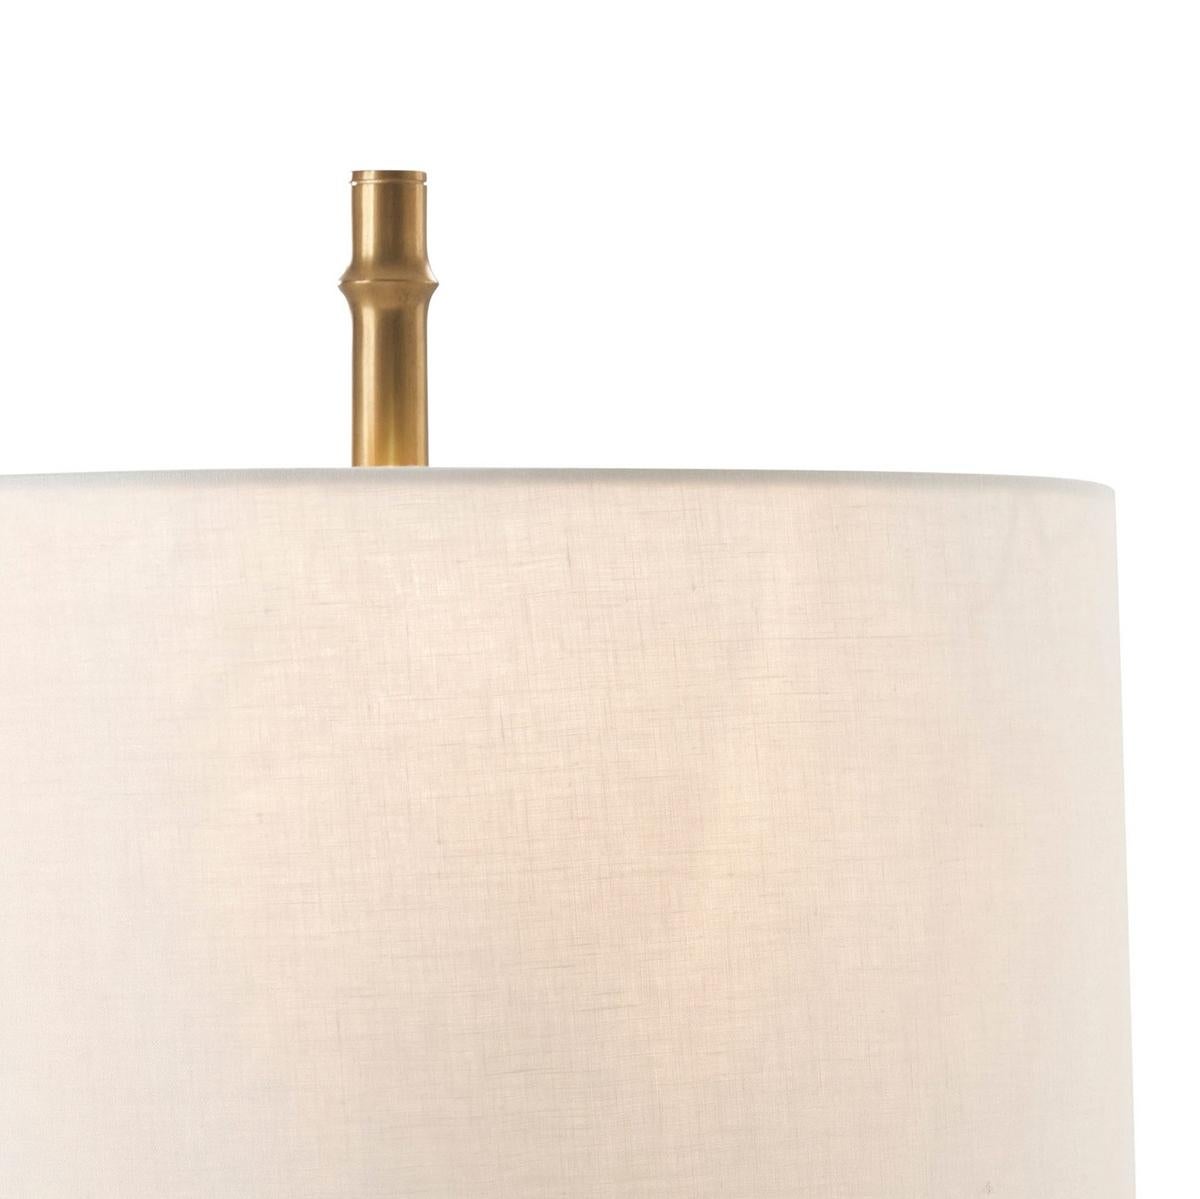 Featuring a unique satin brass-finished faux bamboo pedestal that beautifully complements its round linen shade, creating a warm and inviting glow in any room.

With a modern organic design, this lamp is not just a light fixture but a statement